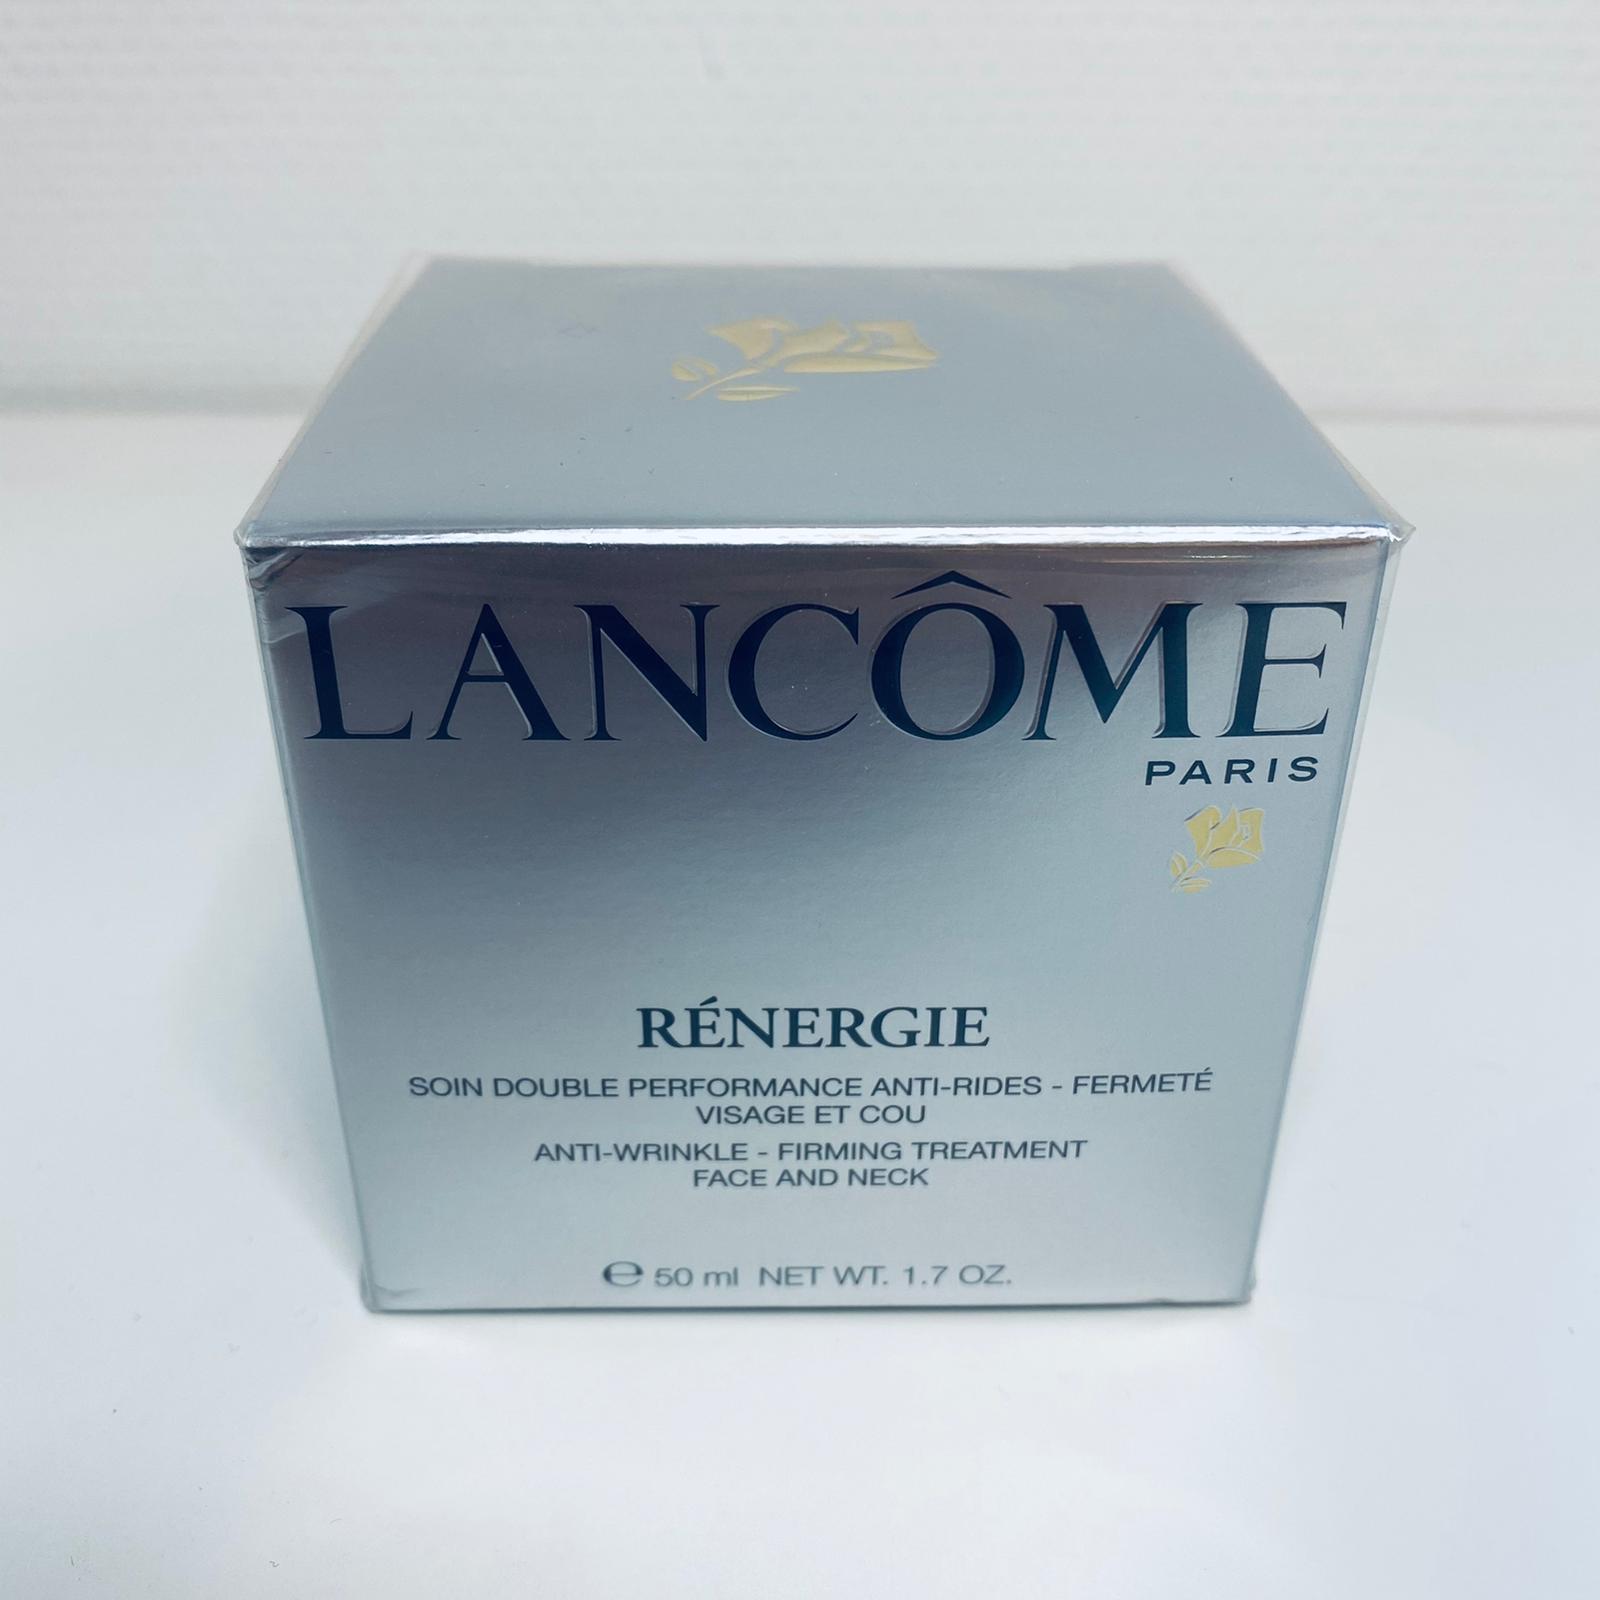 Lancome Renergie Face and Neck Cream 50 ml